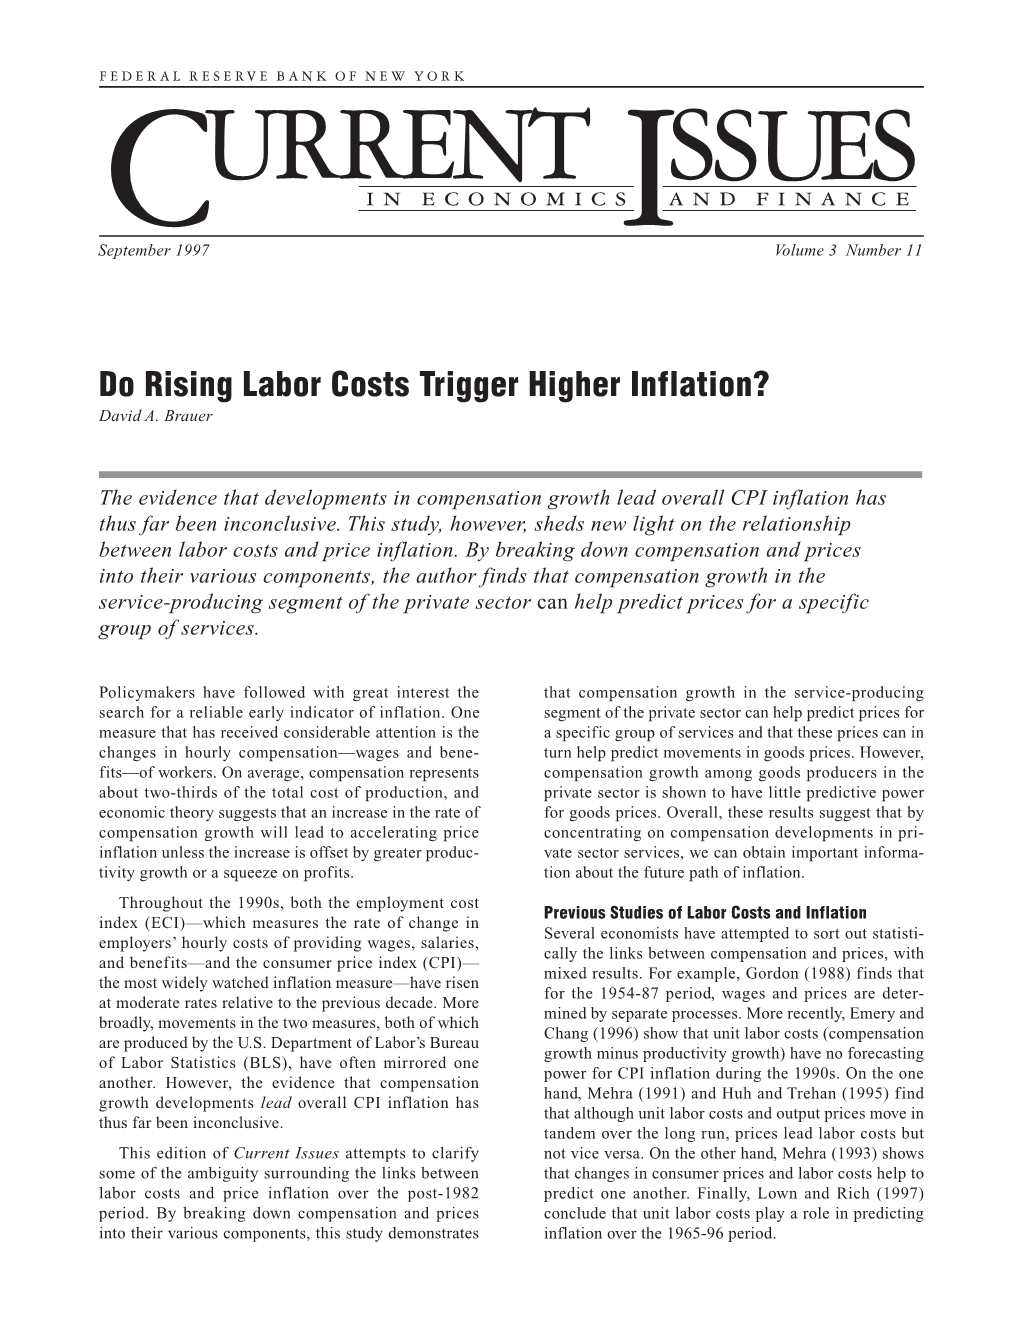 Do Rising Labor Costs Trigger Higher Inflation? David A